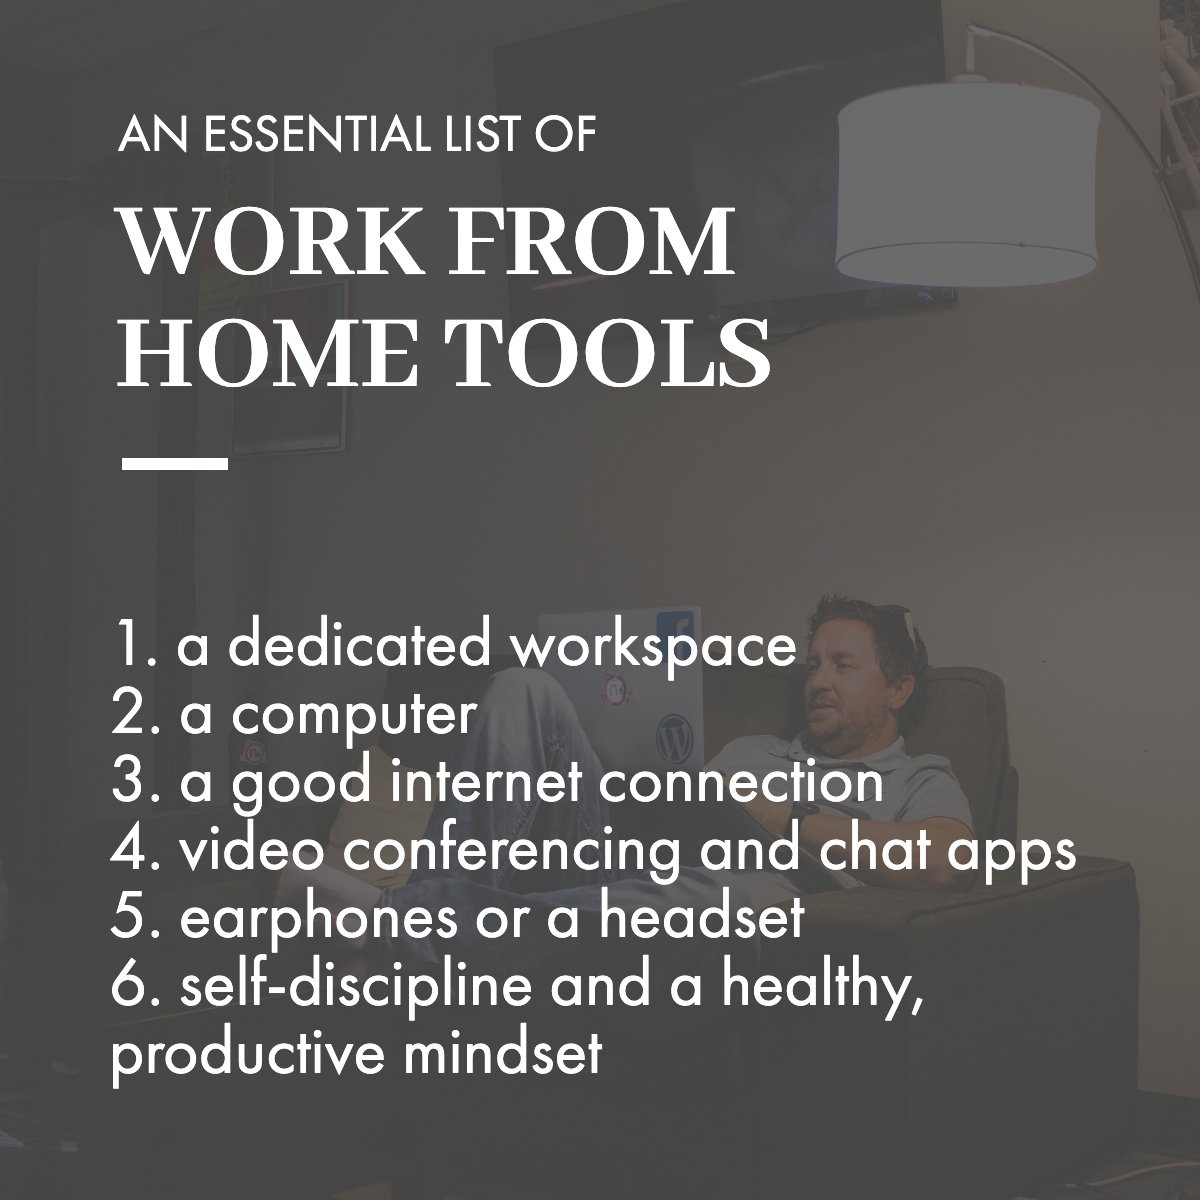 Check the list for essentials to work from home 💻

#workfromhome     #workathome     #homelifestyle     #homestudio     #remotelife
#shelbycountyrealestate #shelbyville #shelbycounty #shelbyvillerealestate #louisvillerealtor #home #househunting #louisvillerealestate